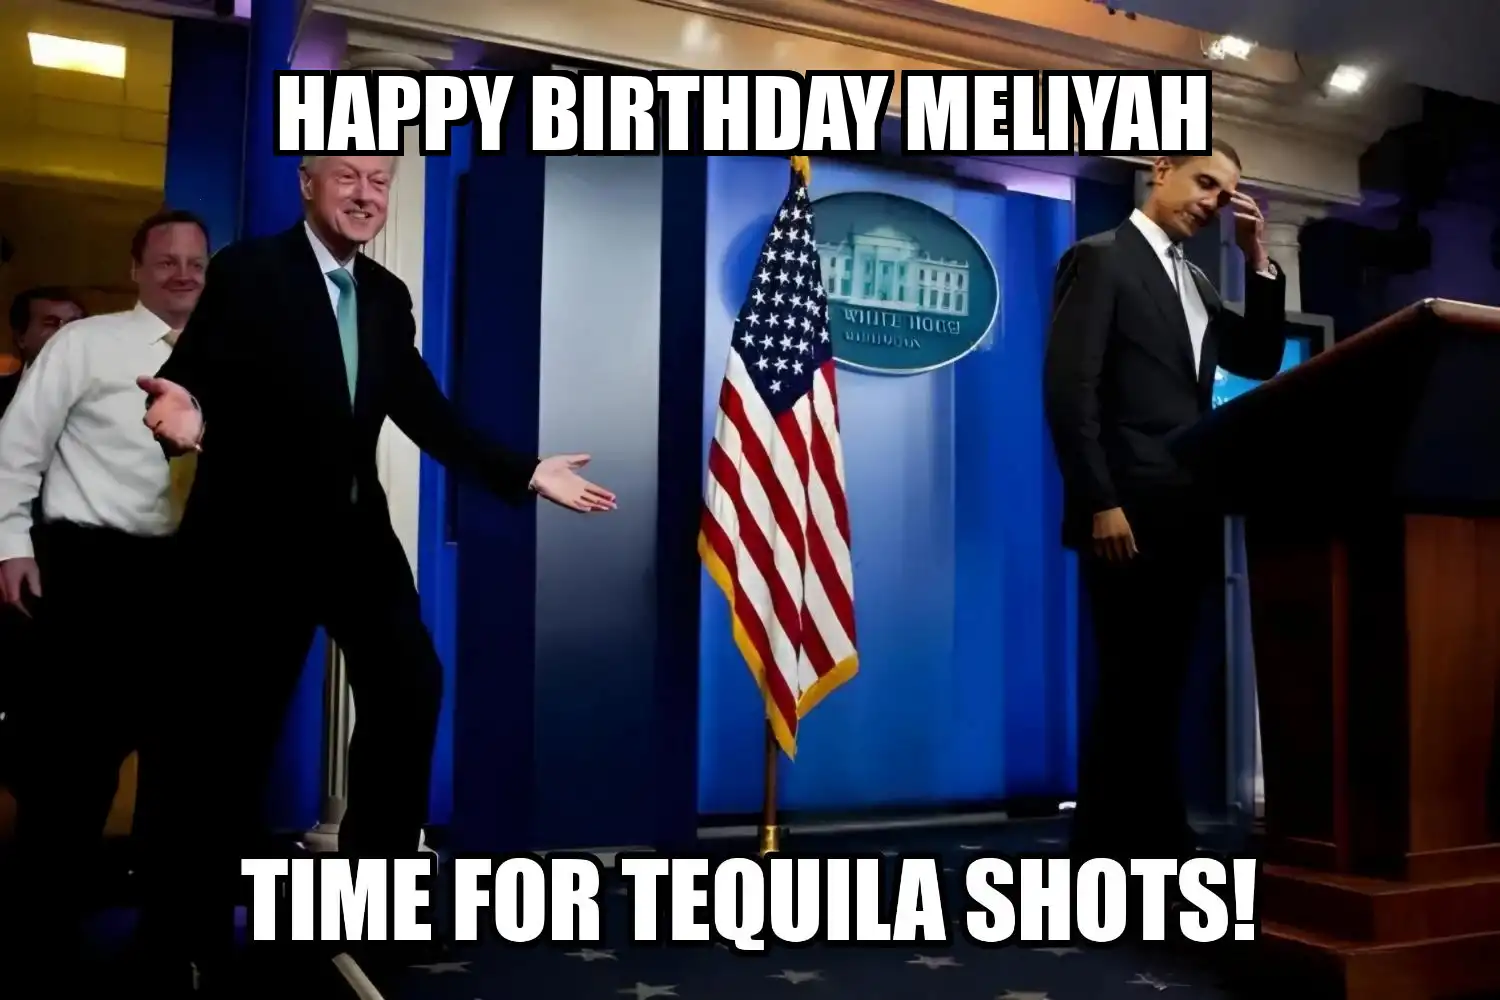 Happy Birthday Meliyah Time For Tequila Shots Memes